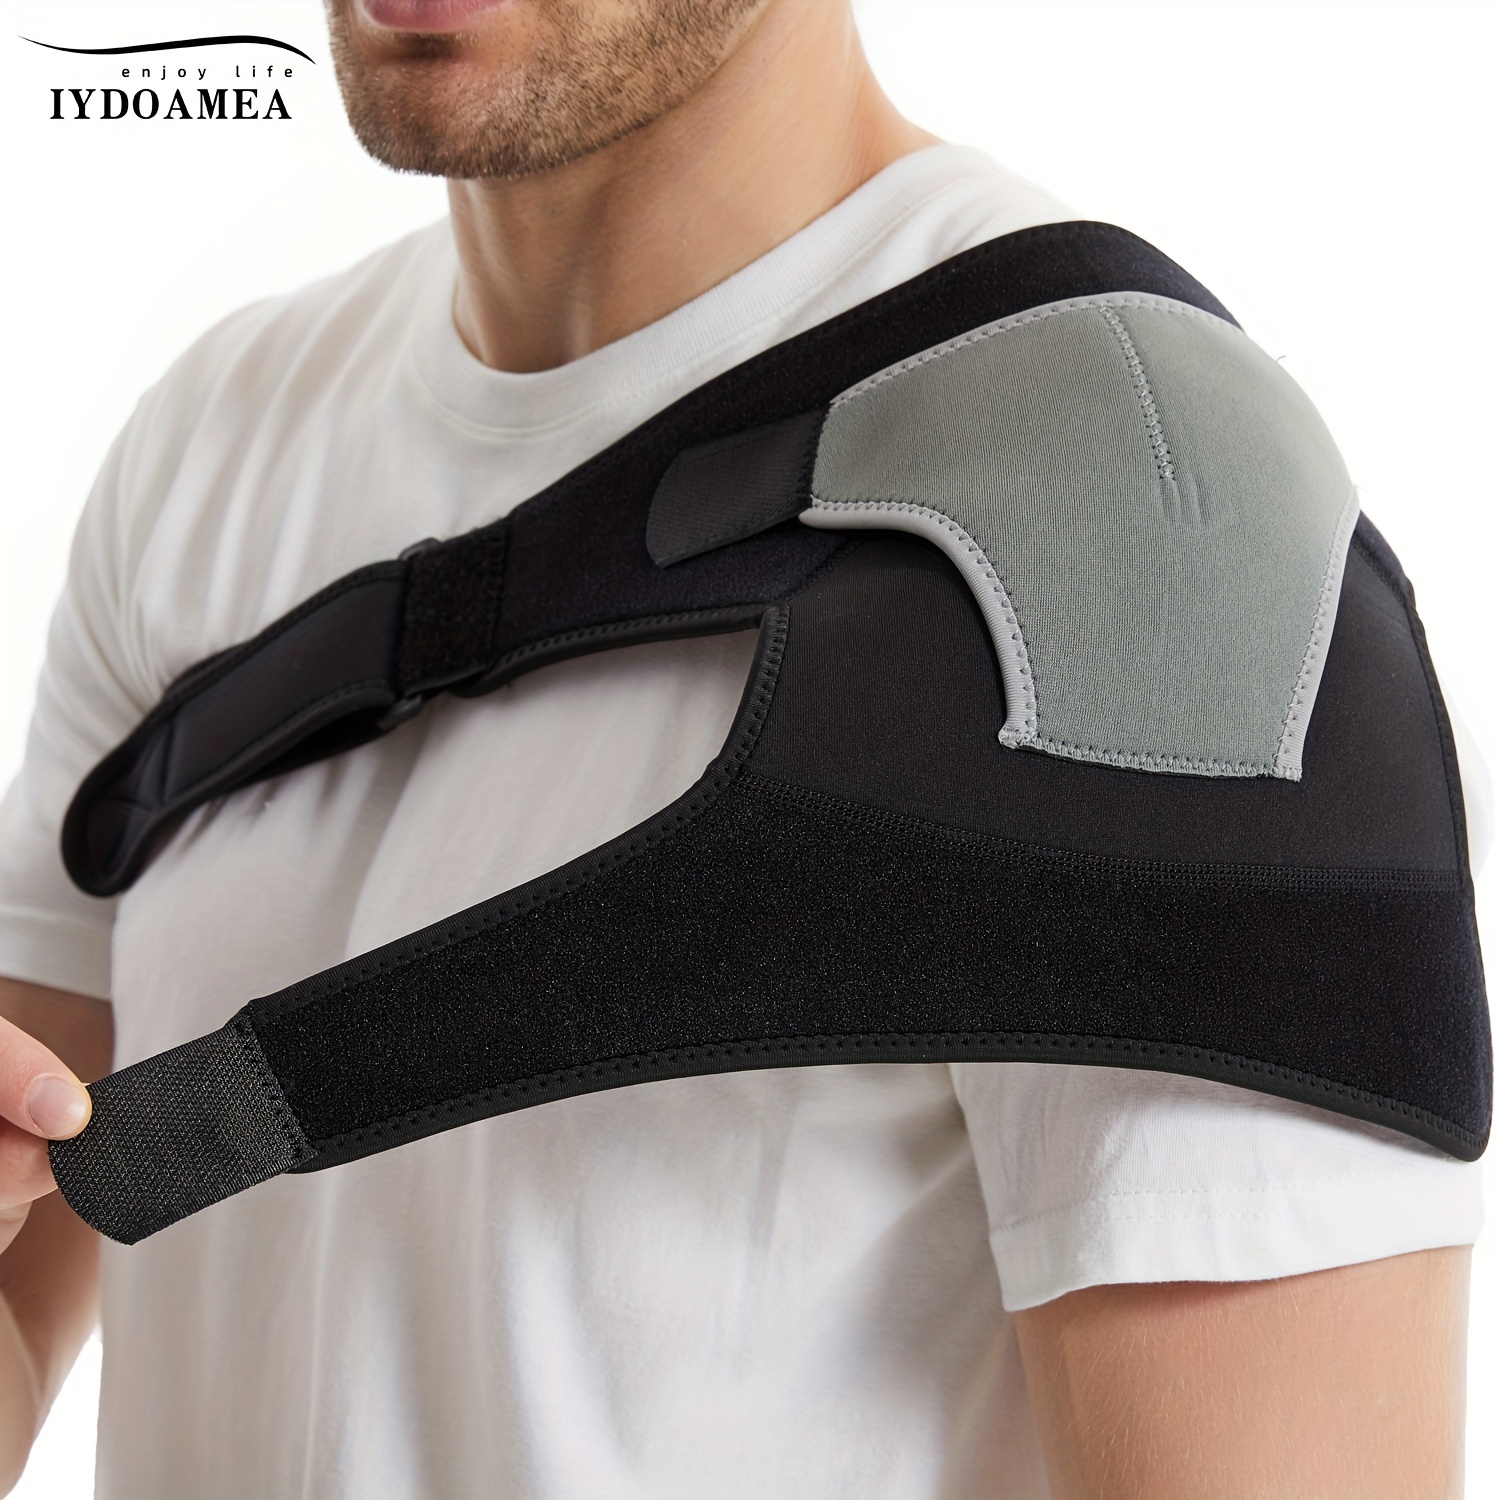 Heated Shoulder Arm Support Brace For Dislocated Back And Shoulders  Rehabilitation Pain Wrap 3050 From Hcy1227, $23.63